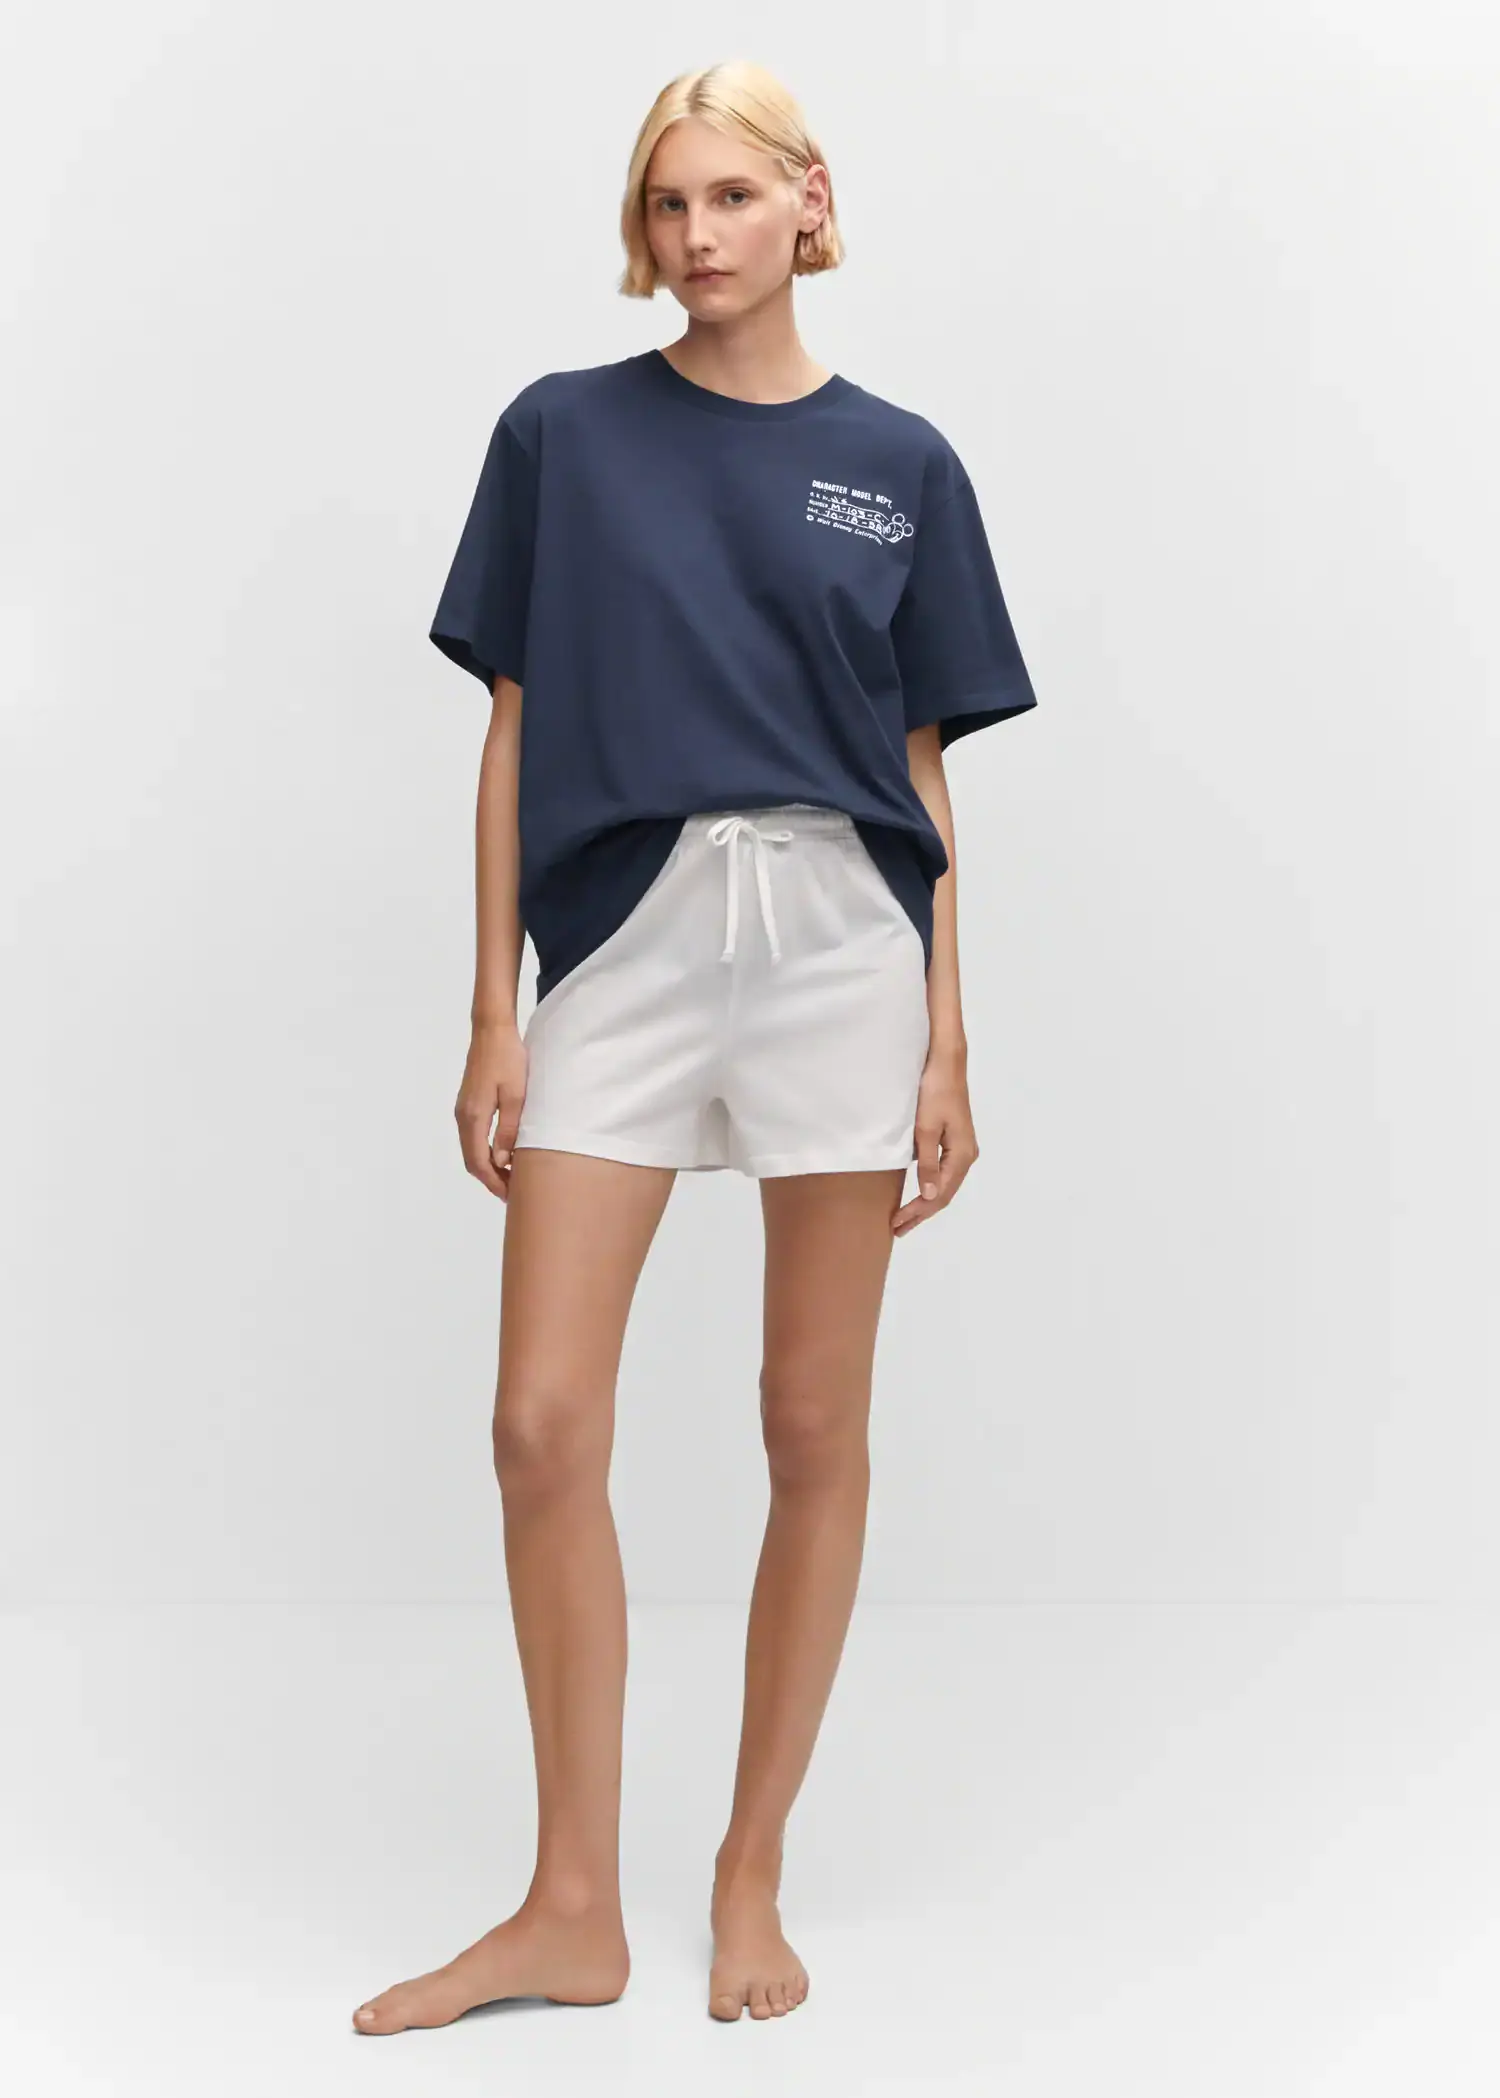 Mango Mickey Mouse cotton t-shirt. a woman wearing white shorts standing in front of a white wall. 